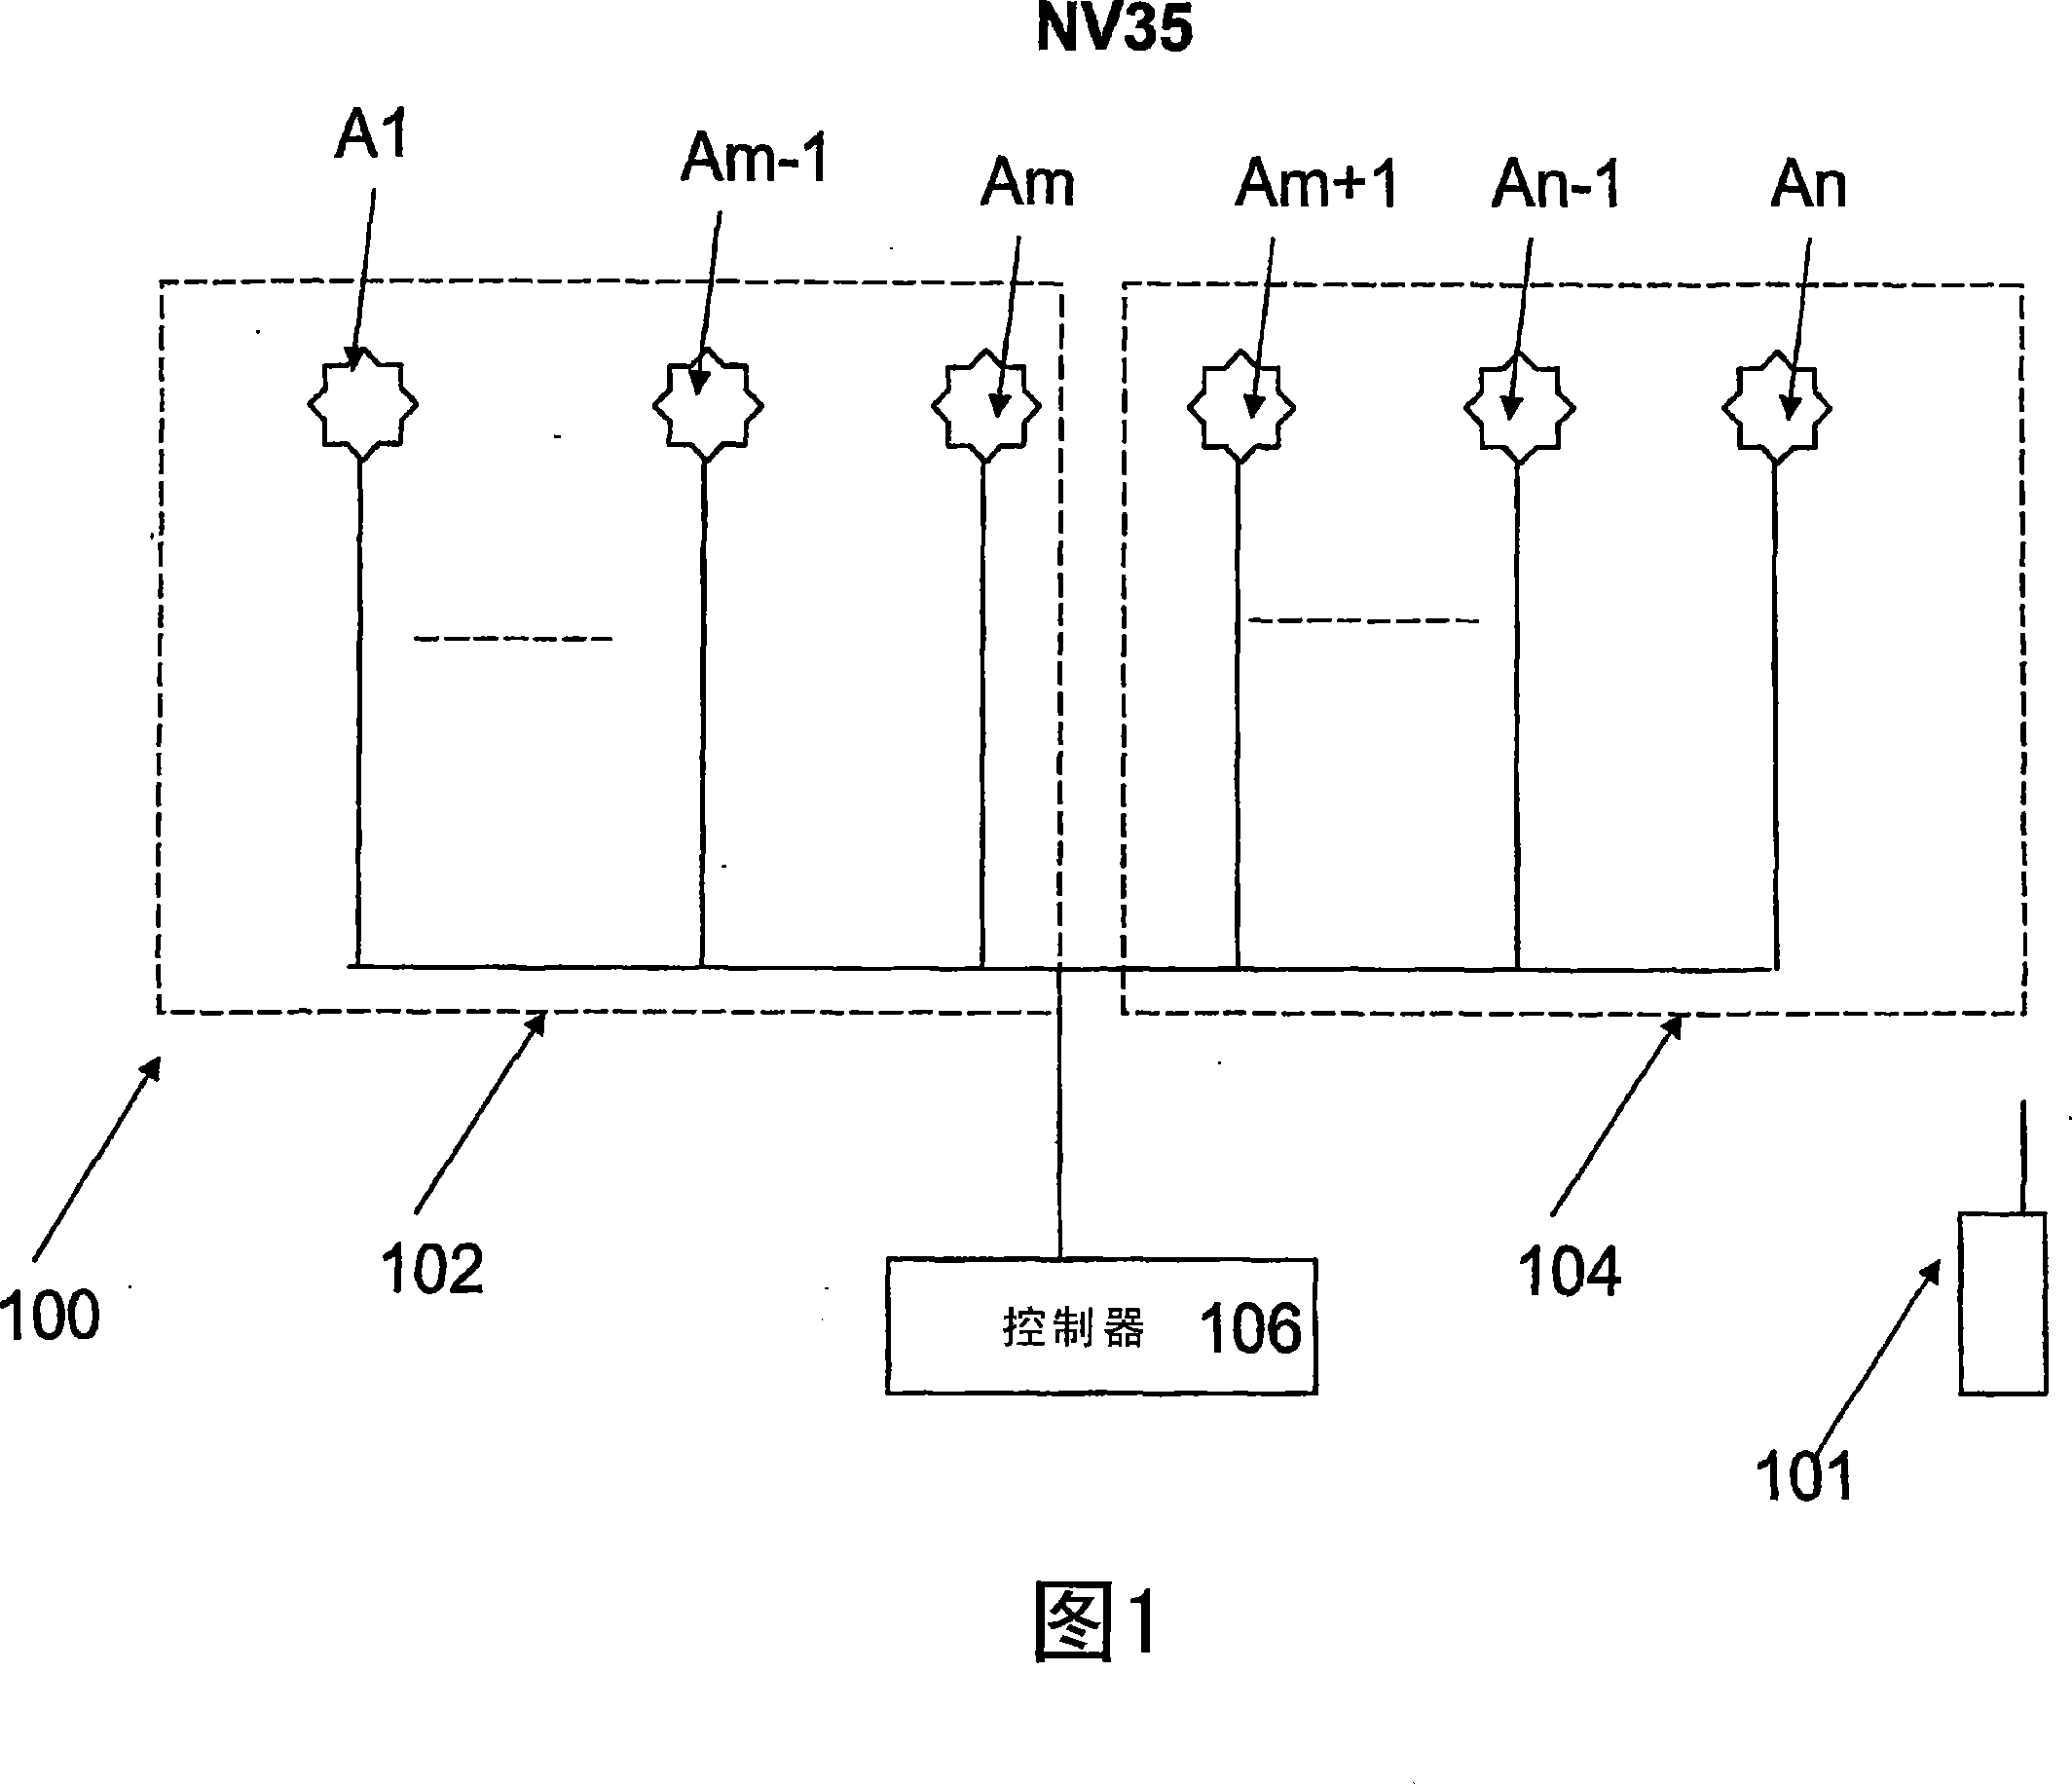 Method and system for partitioning an antenna array and applying multiple-input-multiple-output and beamforming mechanisms